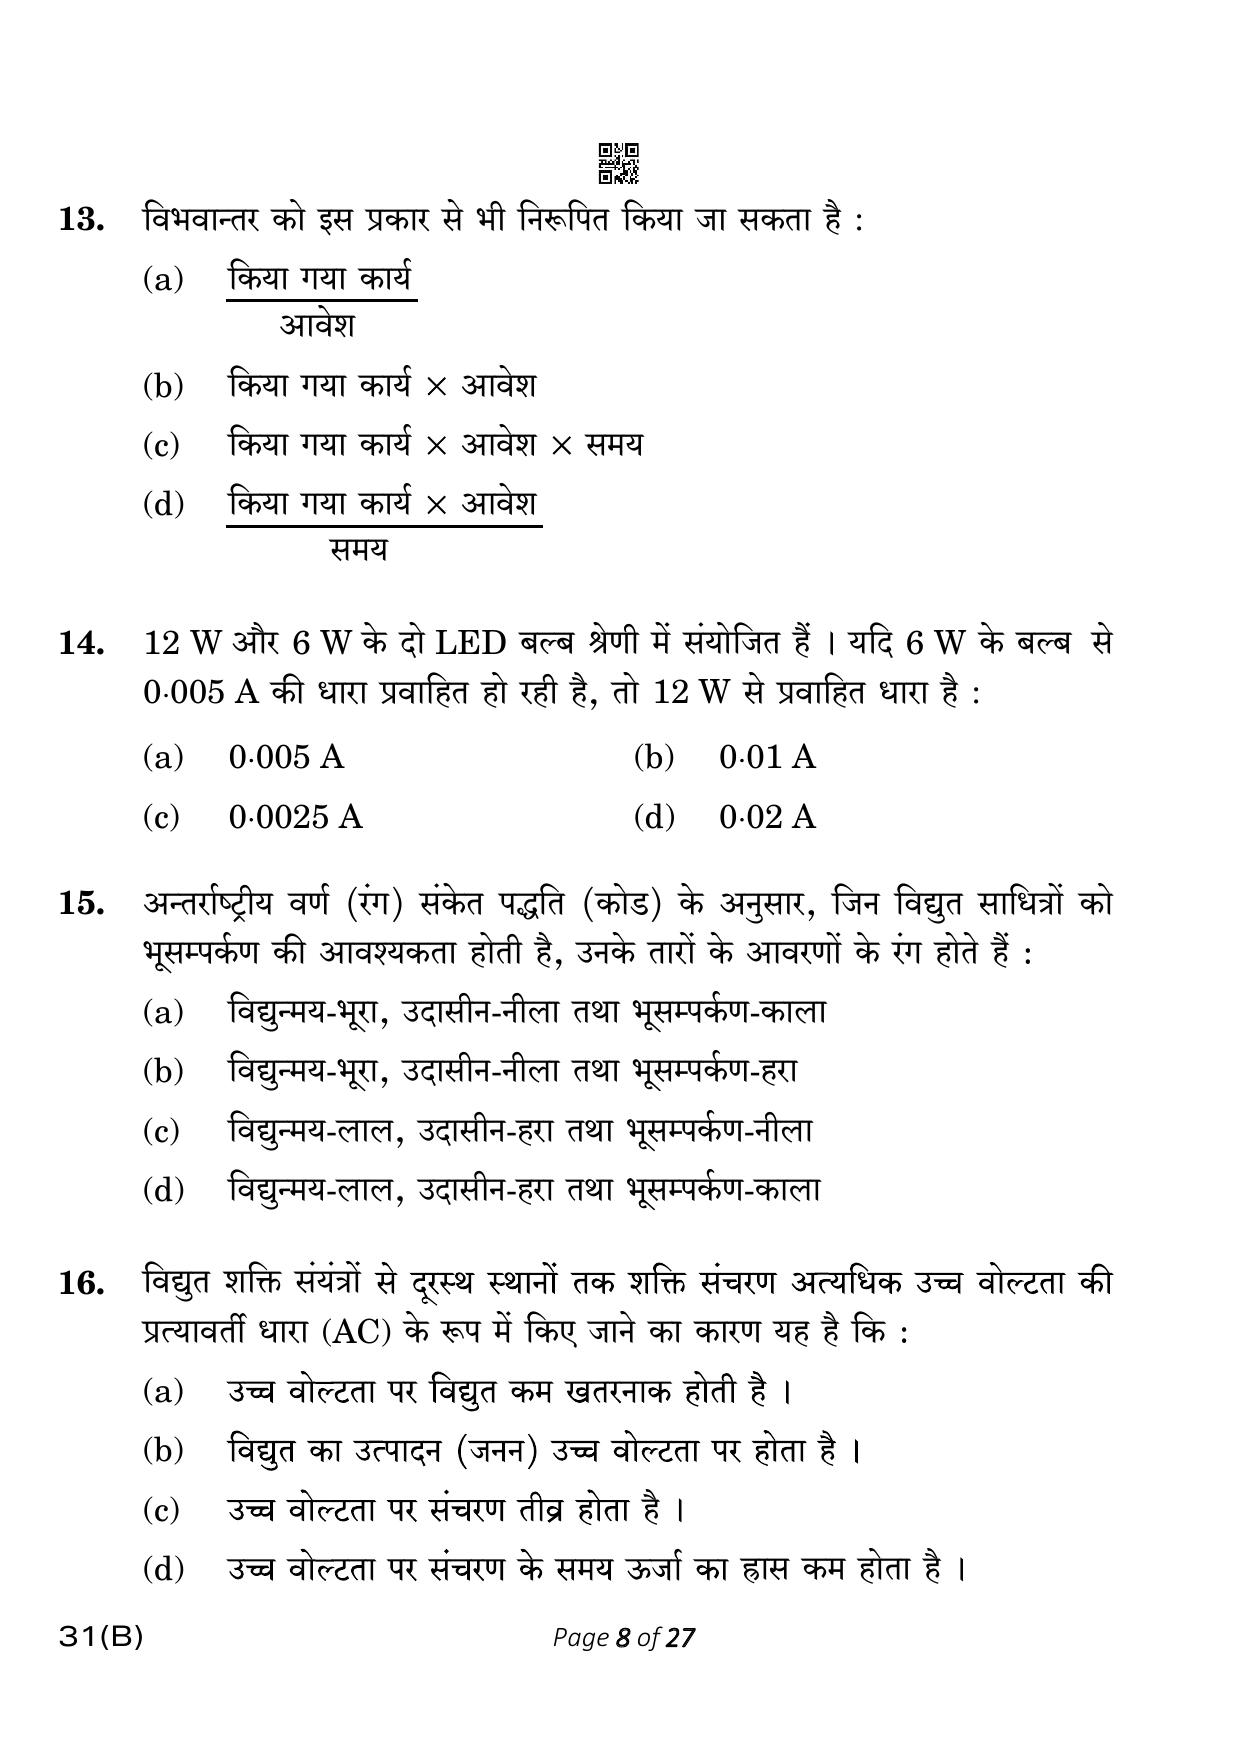 CBSE Class 10 31-B Science 2023 (Compartment) Question Paper - Page 8